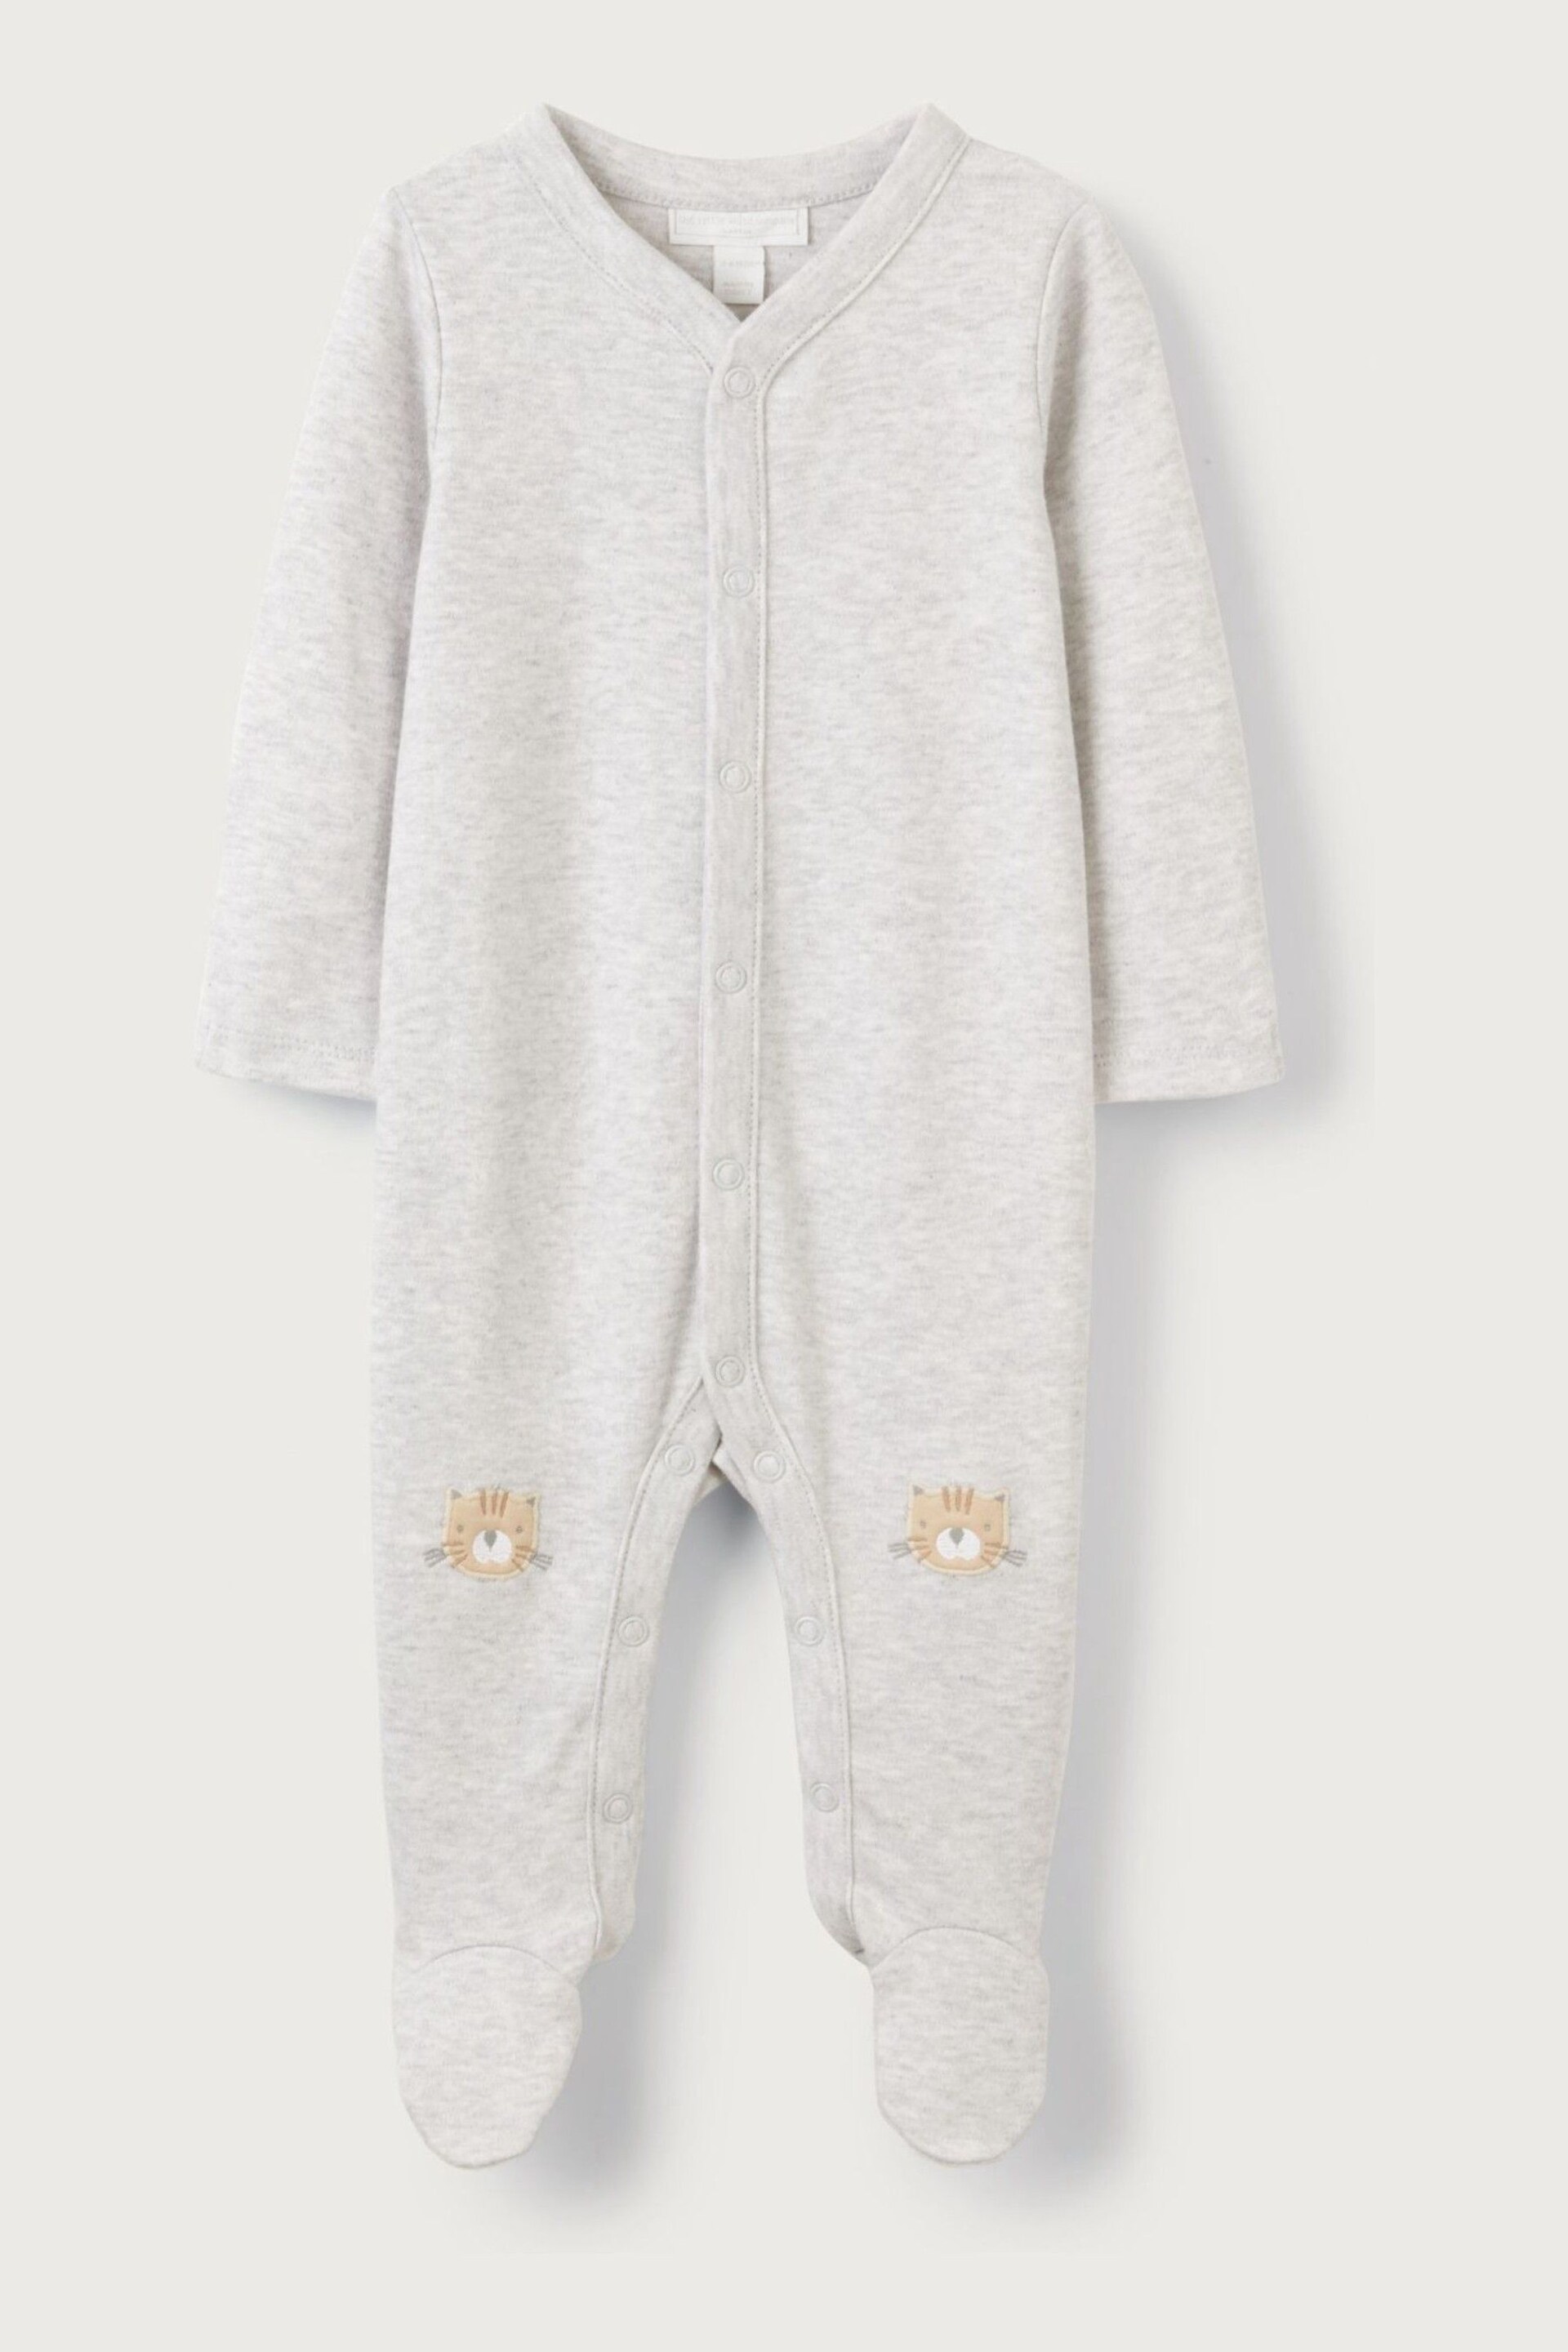 The White Company Grey Cotton Cheetah Knee Popper Down Sleepsuit - Image 3 of 4